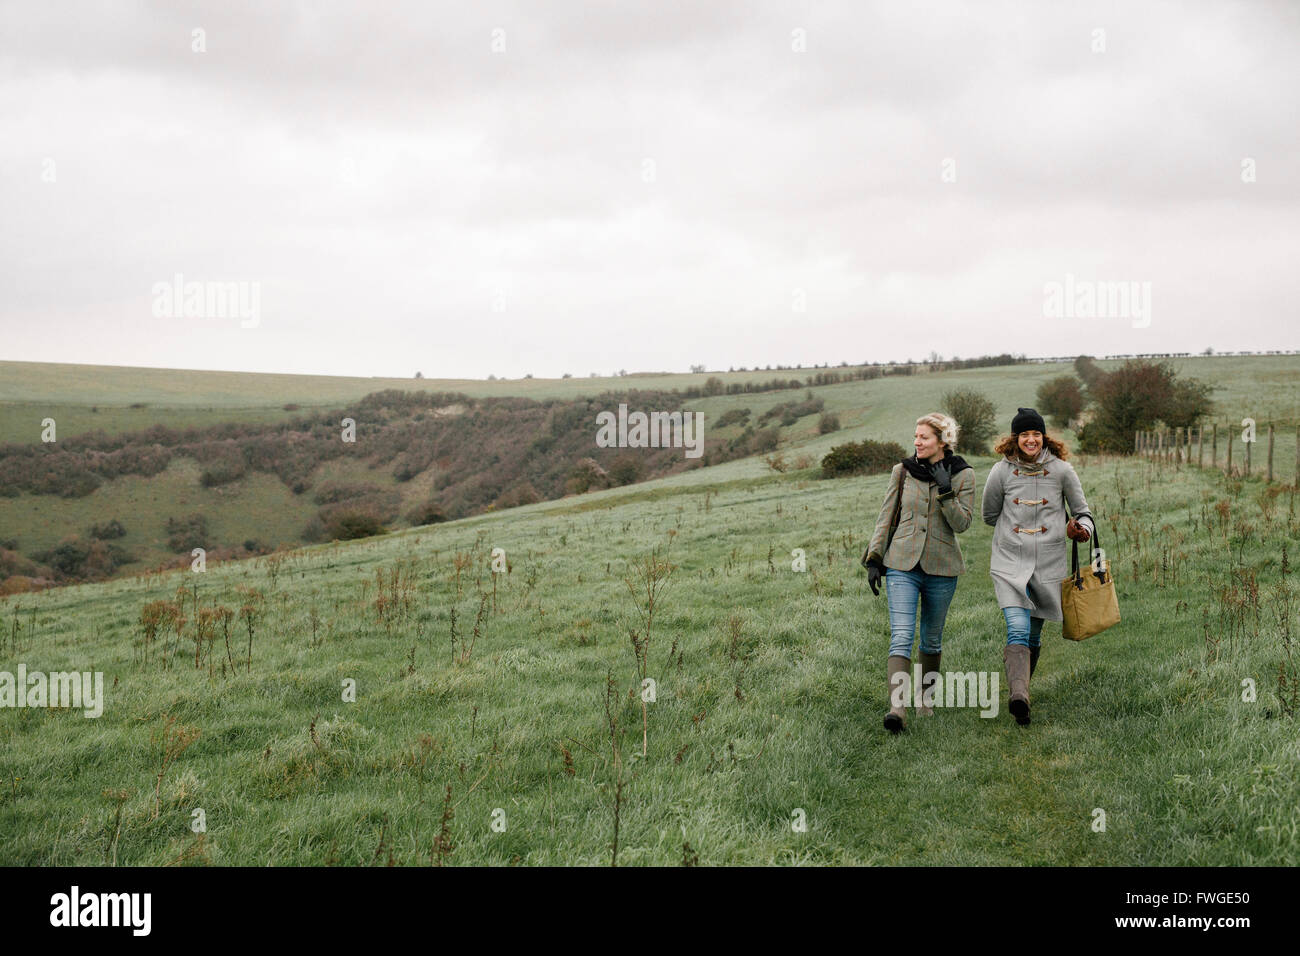 Two women walking on a country path across grassland. Stock Photo